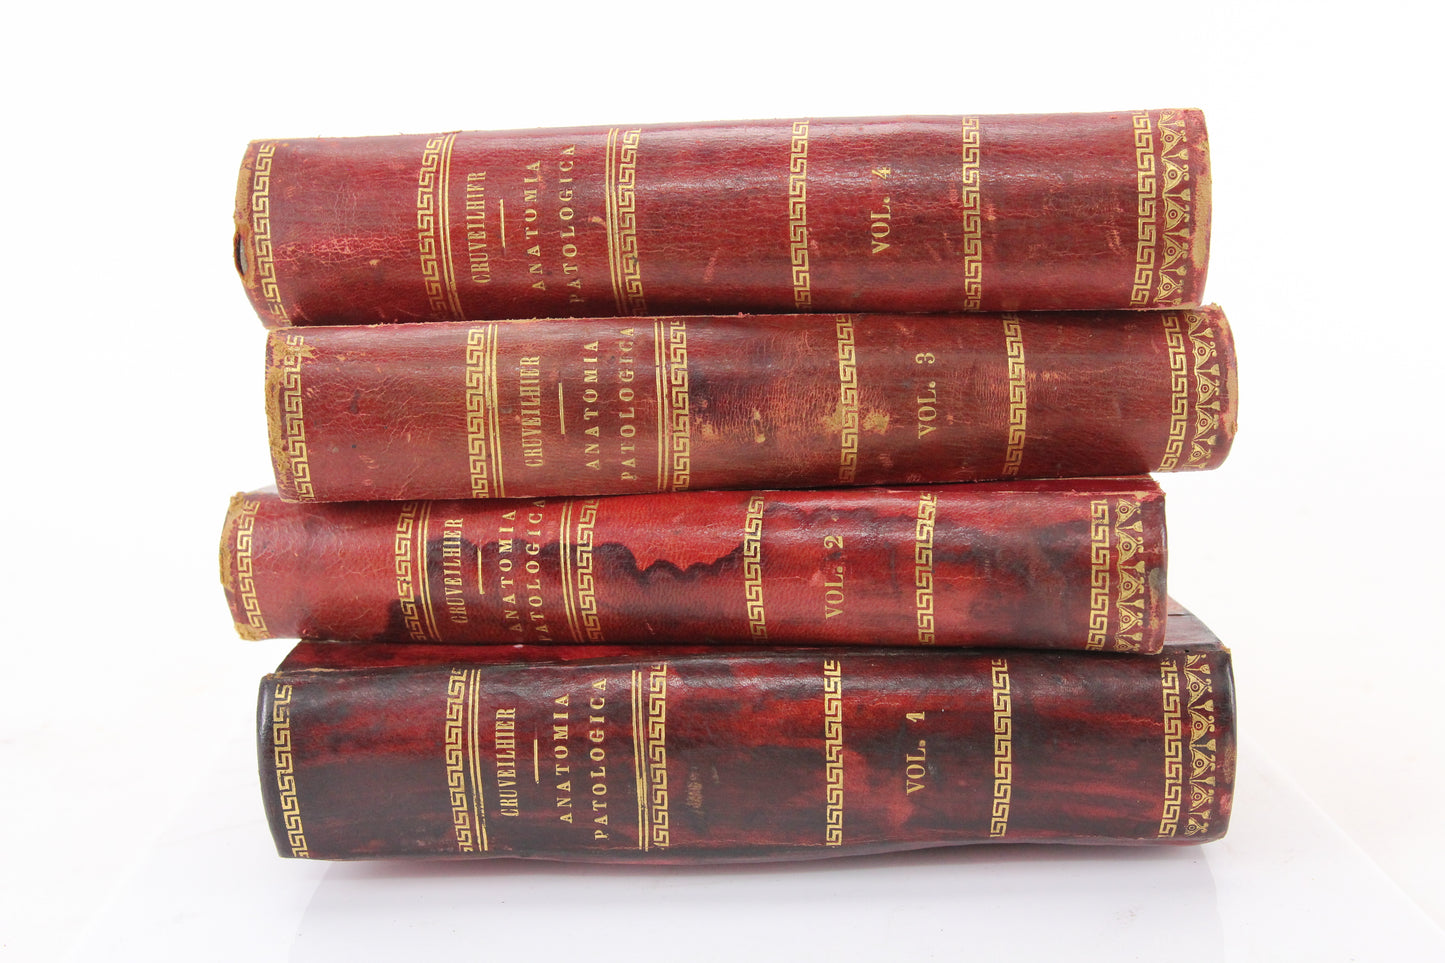 Anatomia Patologica (Pathological Anatomy) by Jean Cruveilhier, Volume 1-4, 1838